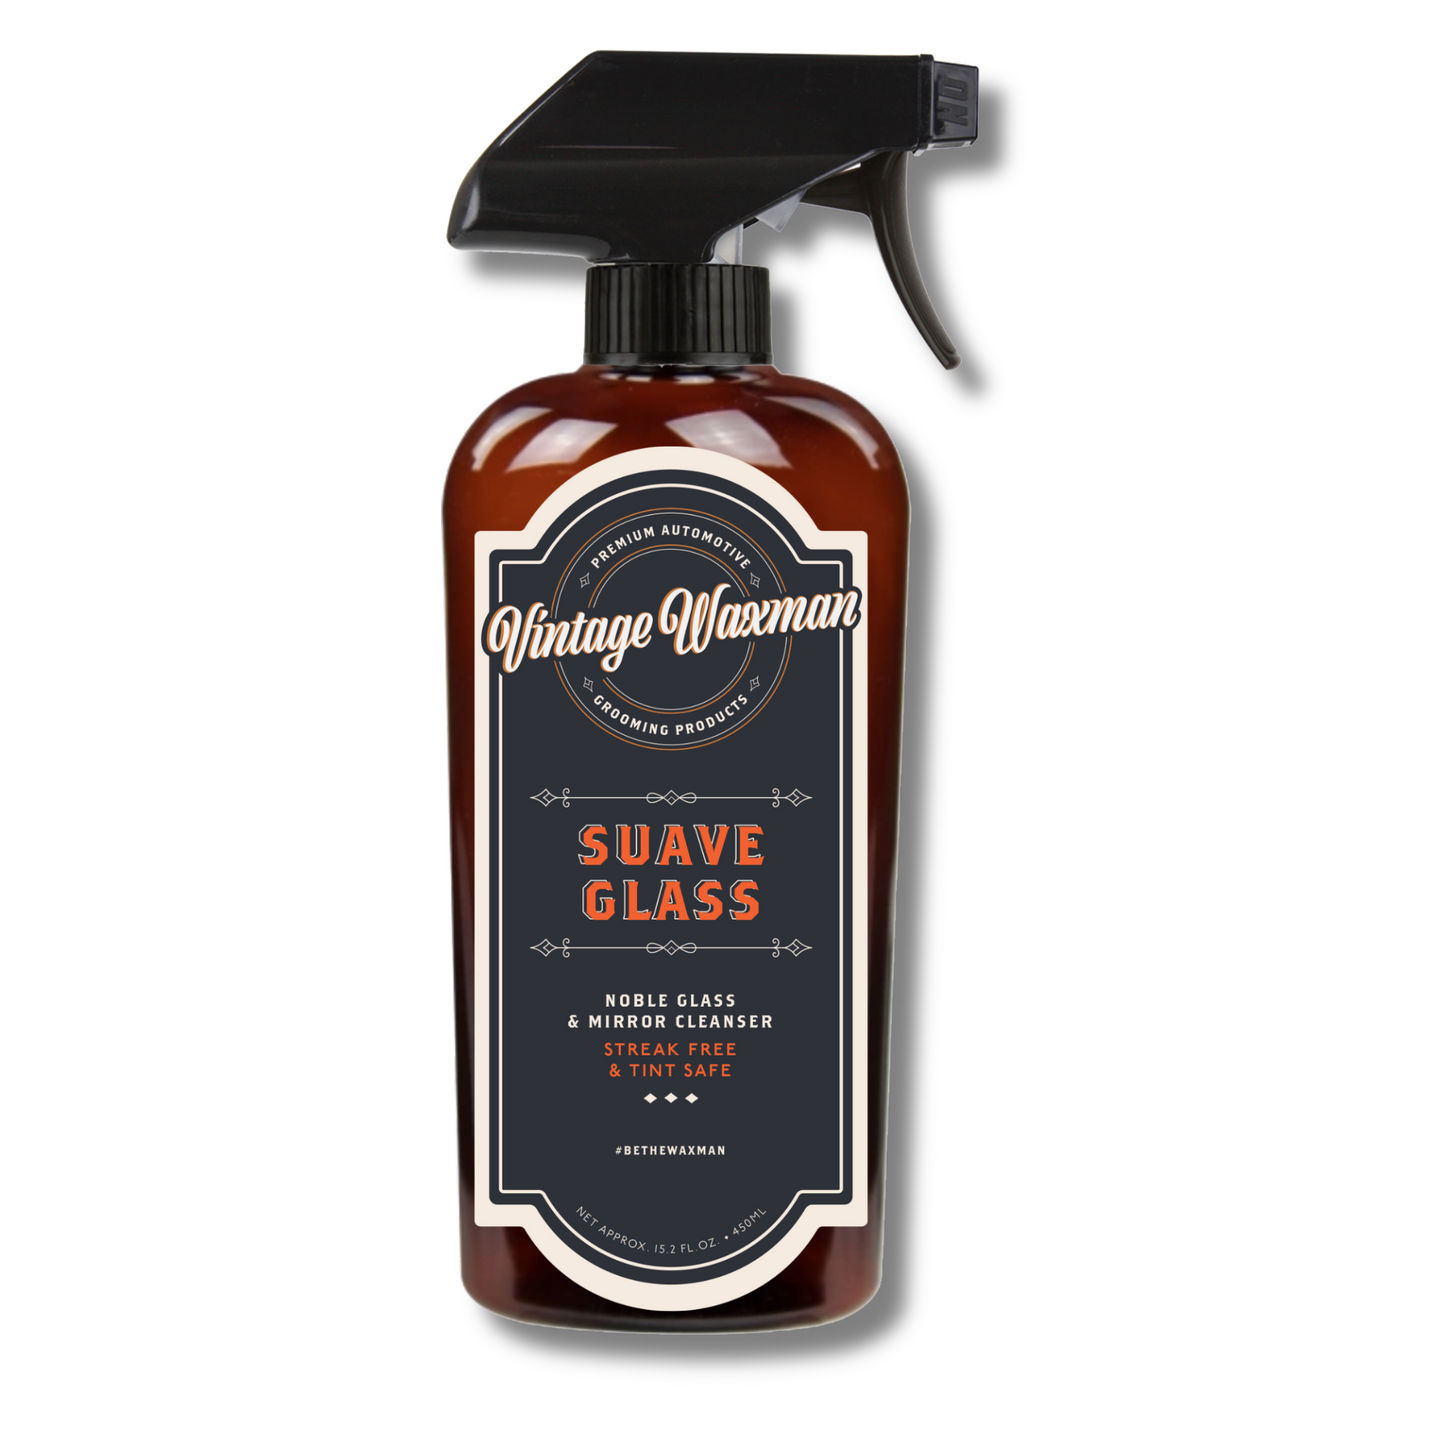 Suave Glass {Noble Glass & Mirror Cleanser}